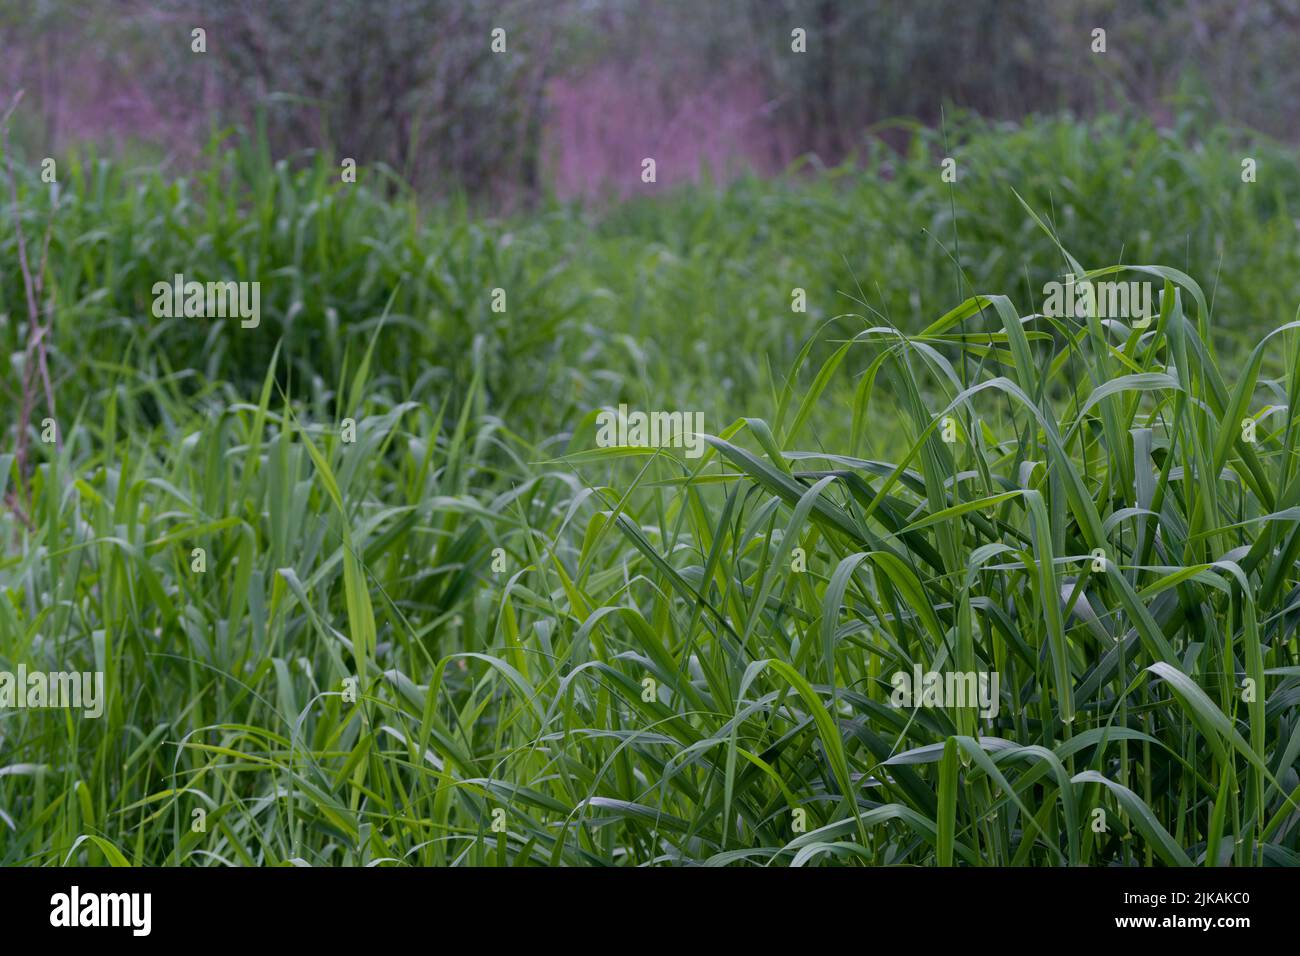 Tuft of grass with bent down grass blades, many grass blades in cluster Stock Photo